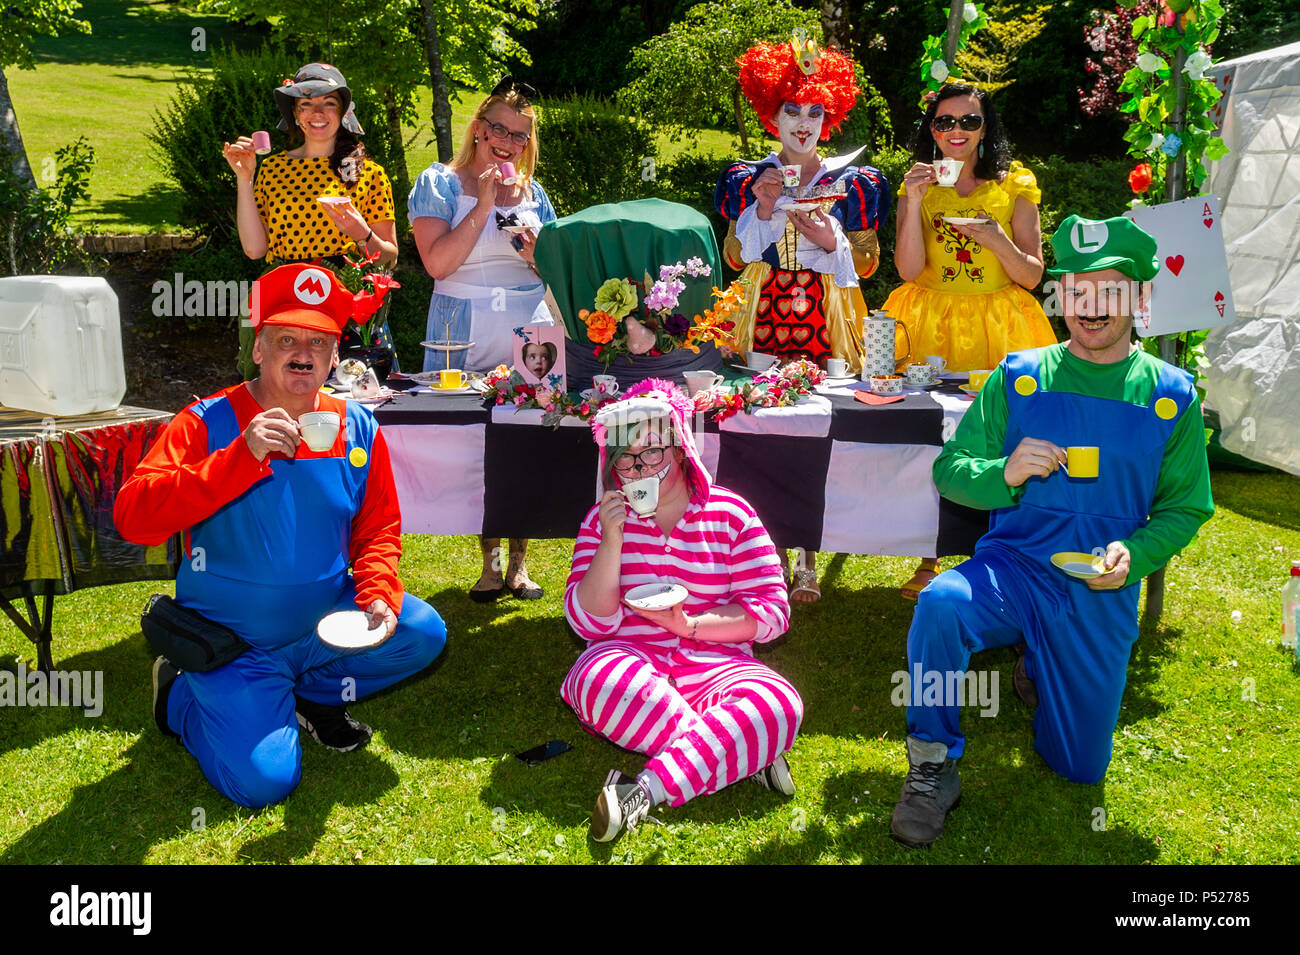 Bantry, Ireland. 24th June, 2018. Bumbleance - the Official Children's National Ambulance Service of Ireland is a crucial service for sick children. A fundraiser was held at Westlodge Hotel, Bantry today in scorching sunshine with Alice in Wonderland being the fancy dress theme. Pictured at the event are organisers and volunteers. Credit: Andy Gibson/Alamy Live News. Stock Photo